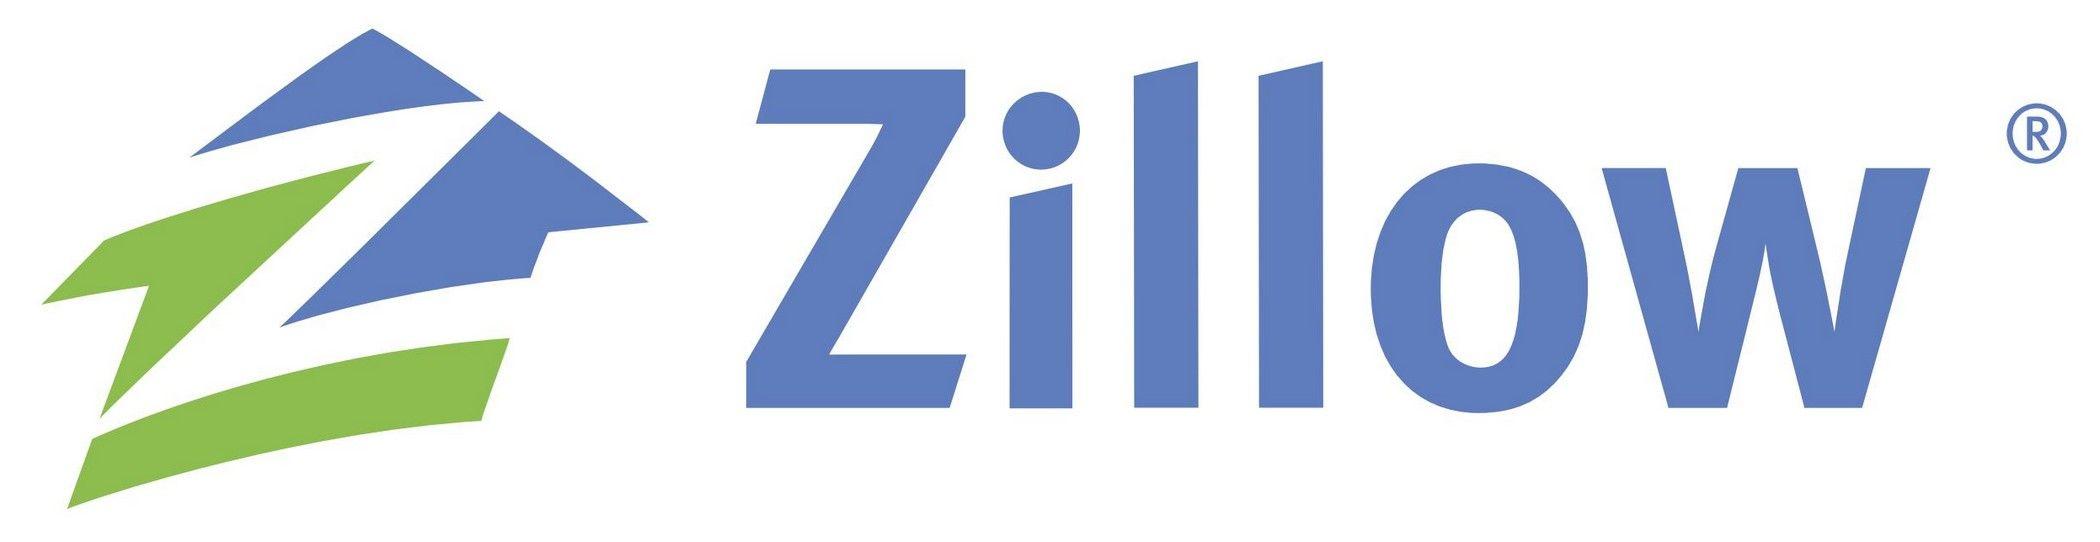 Zillow Review Logo - Zillow | $Z Stock | Shares Dip Following Q1 Earnings And Guidance ...